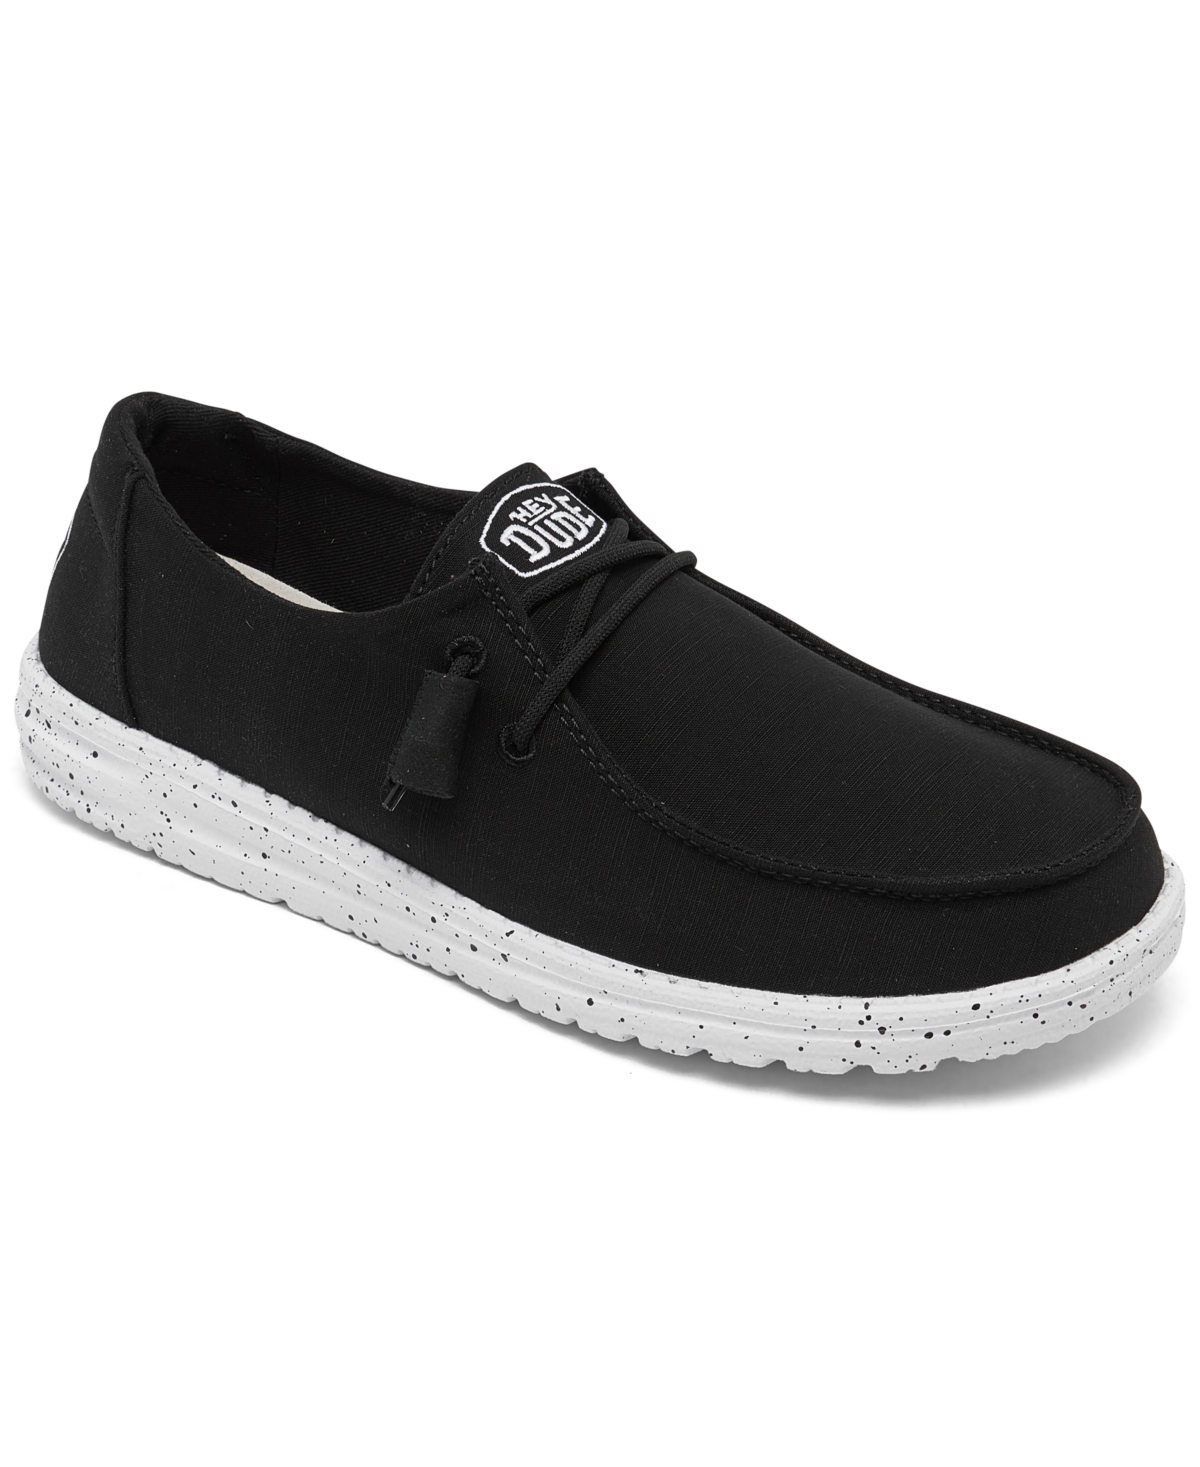 Women's Wendy Slub Canvas Casual Moccasin Sneakers from Finish Line - Black, White